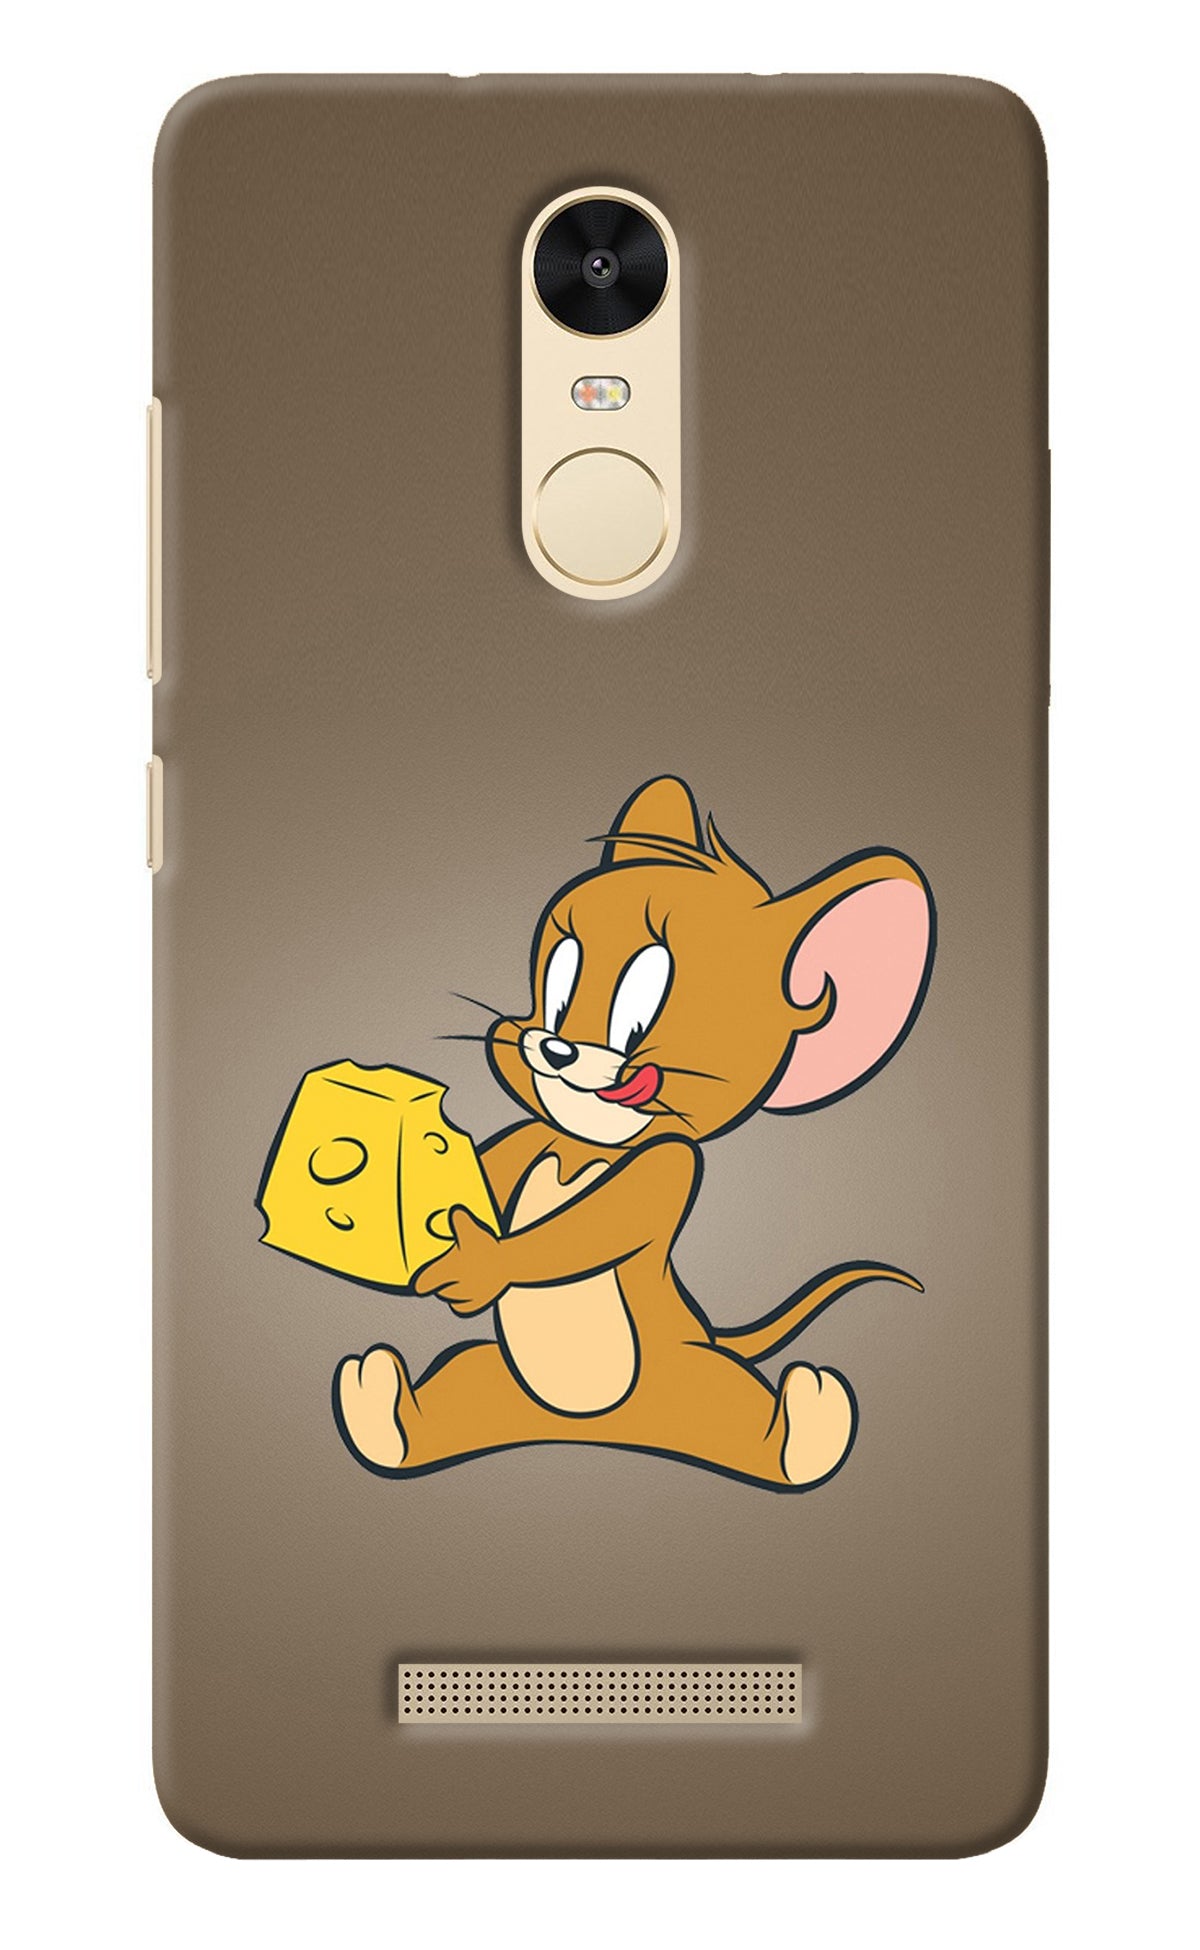 Jerry Redmi Note 3 Back Cover